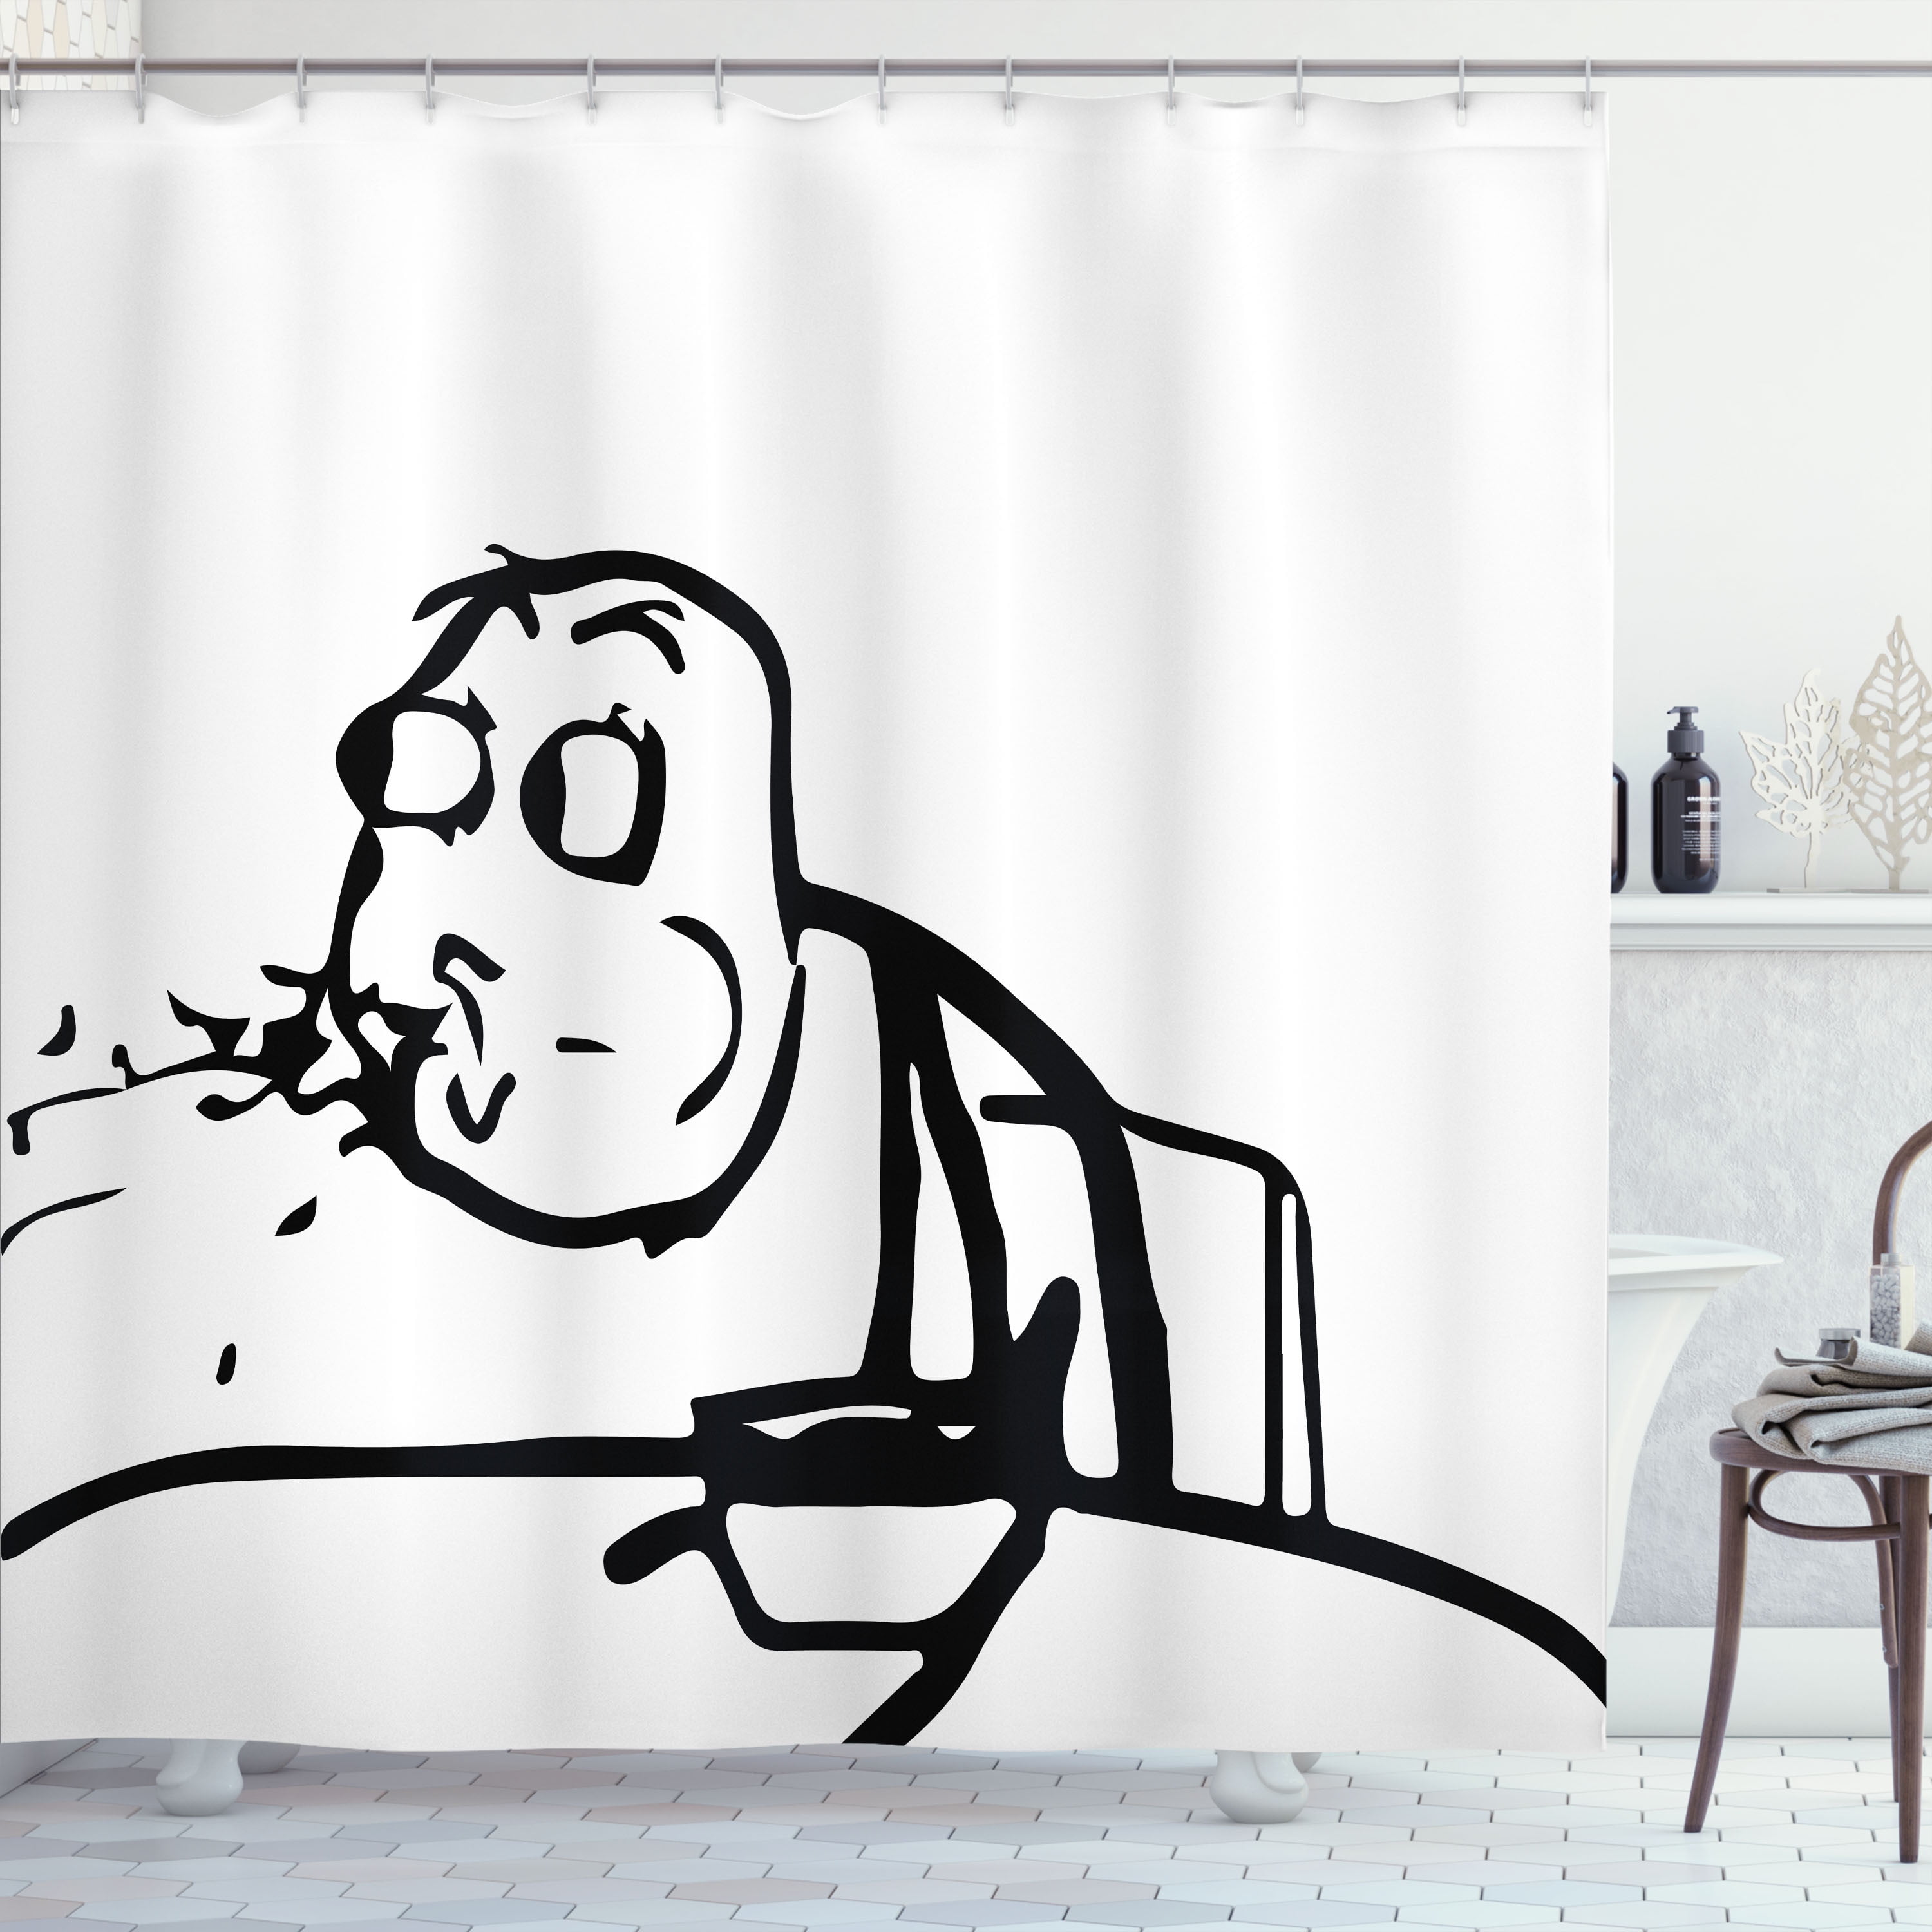  Ambesonne Humor Curtains, Stickman Meme Face Looking at  Computer Joyful Fun Caricature Comic Design, Living Room Bedroom Window  Drapes 2 Panel Set, 108 X 90, Black and White : Home 